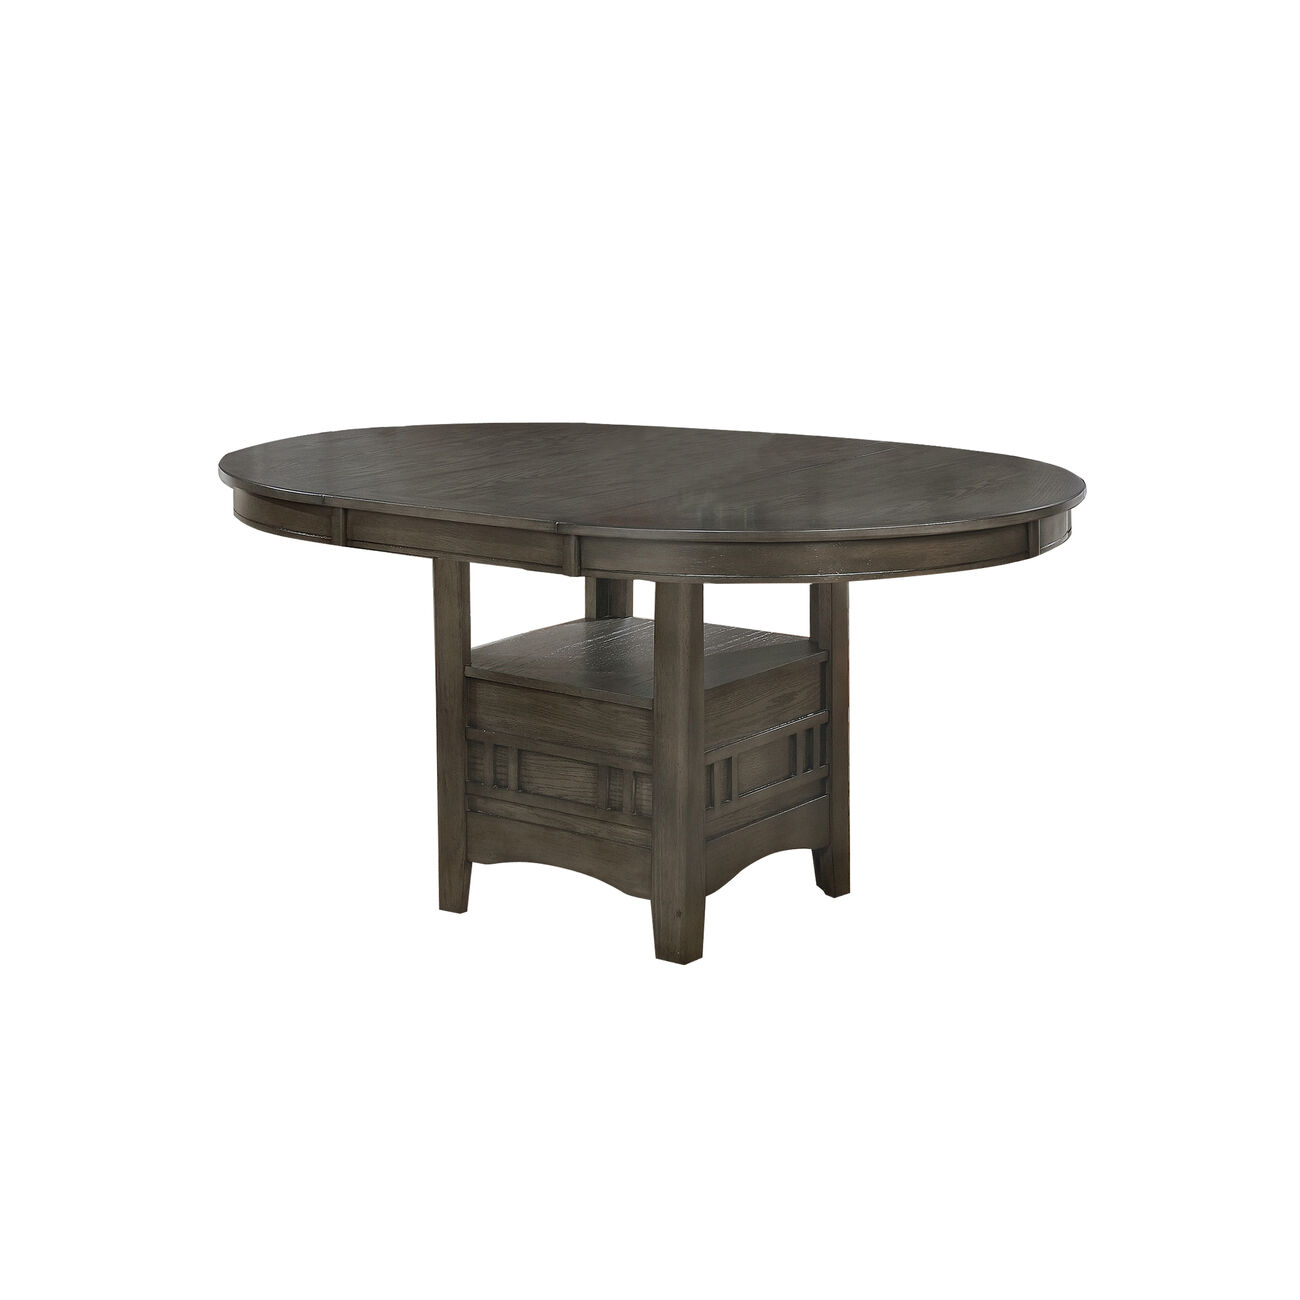 Extendable Round Wooden Dining Table with Open Bottom Shelf, Gray